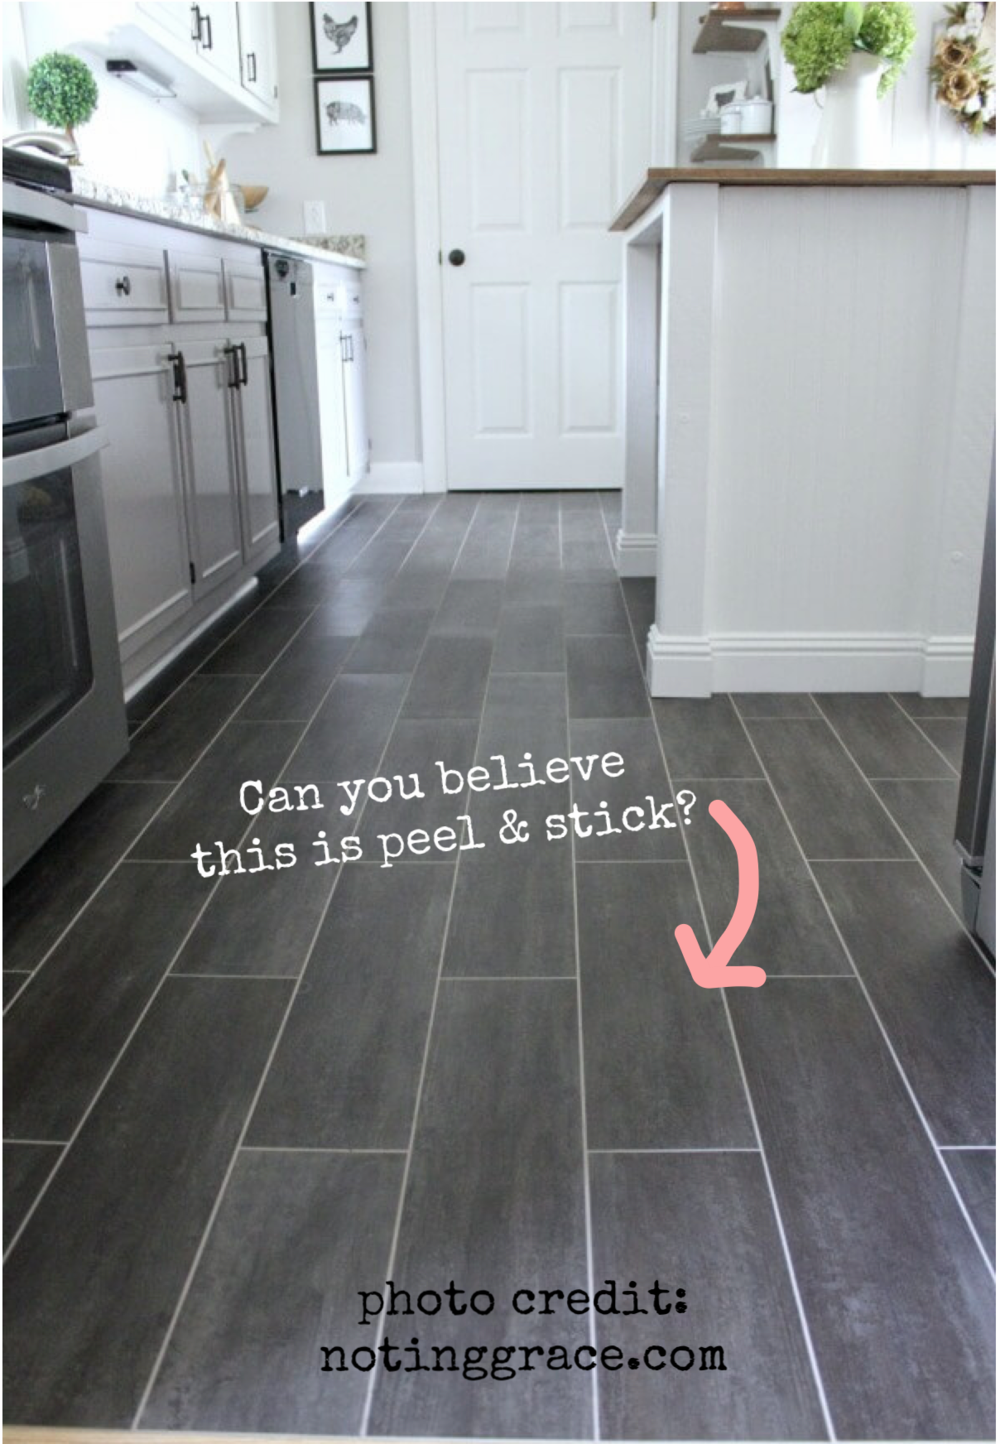 Ideas For Covering Up Tile Floors, Can You Place Vinyl Flooring Over Ceramic Tile